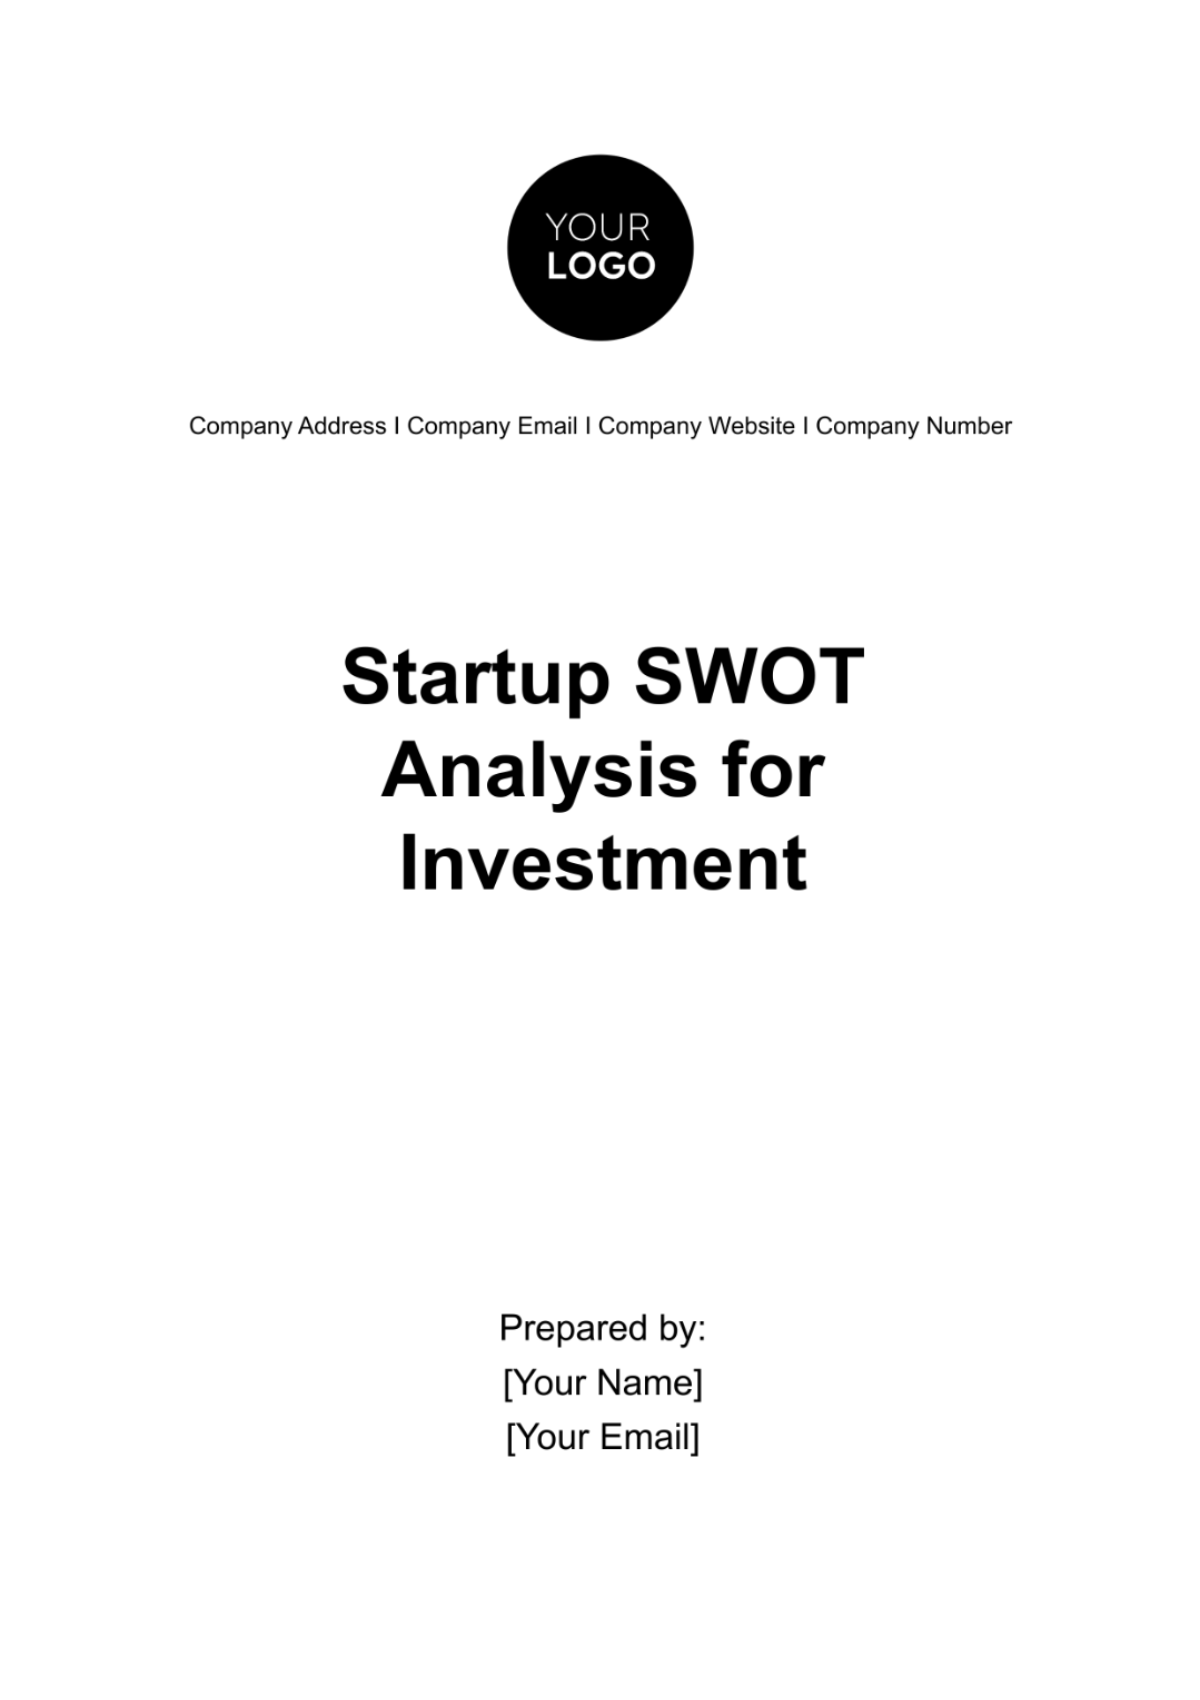 Startup SWOT Analysis for Investment Template